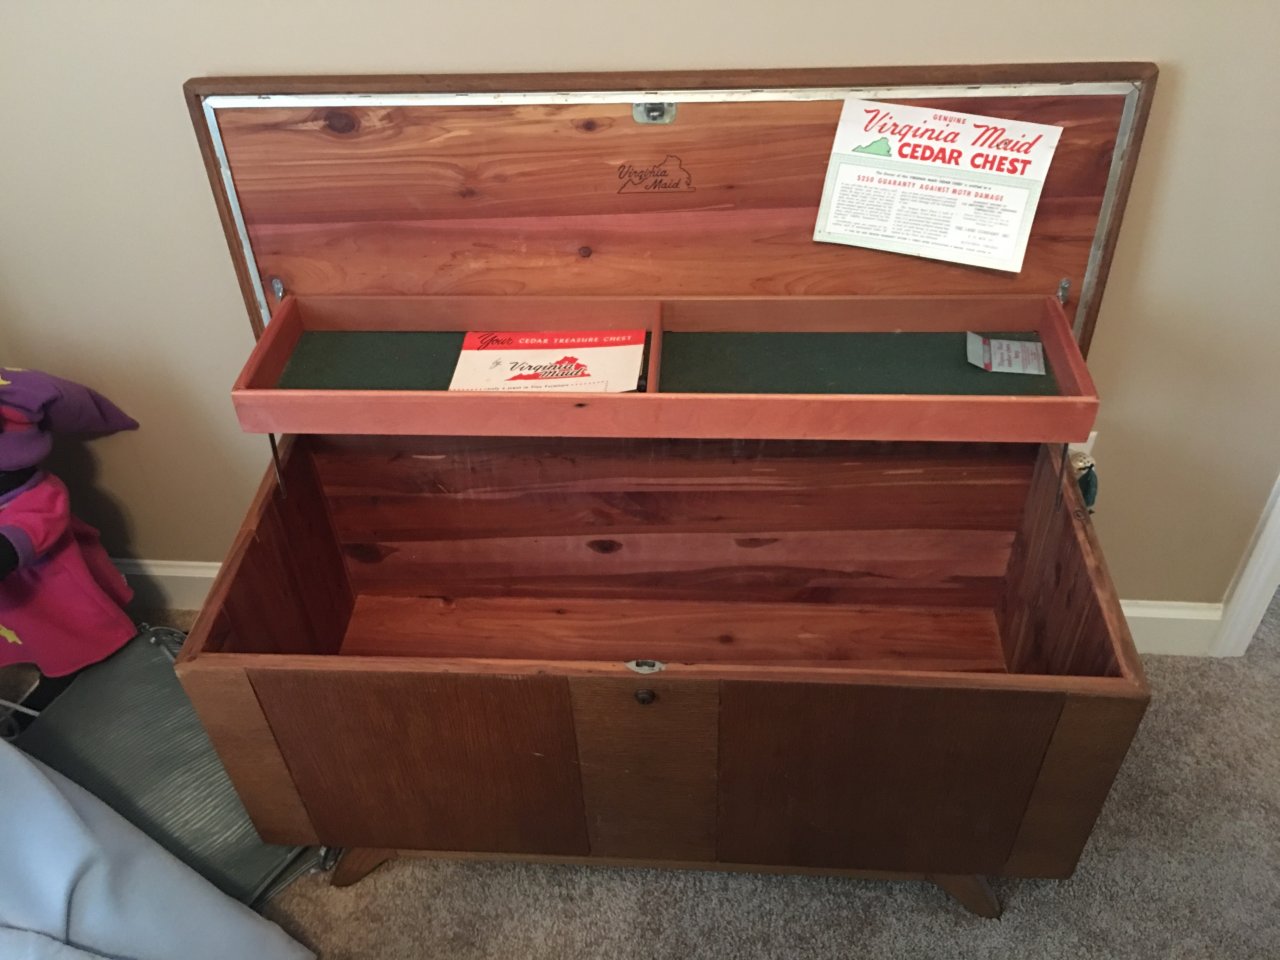 What Is The Value Of A Virginia Maid Cedar Chest With A 1958